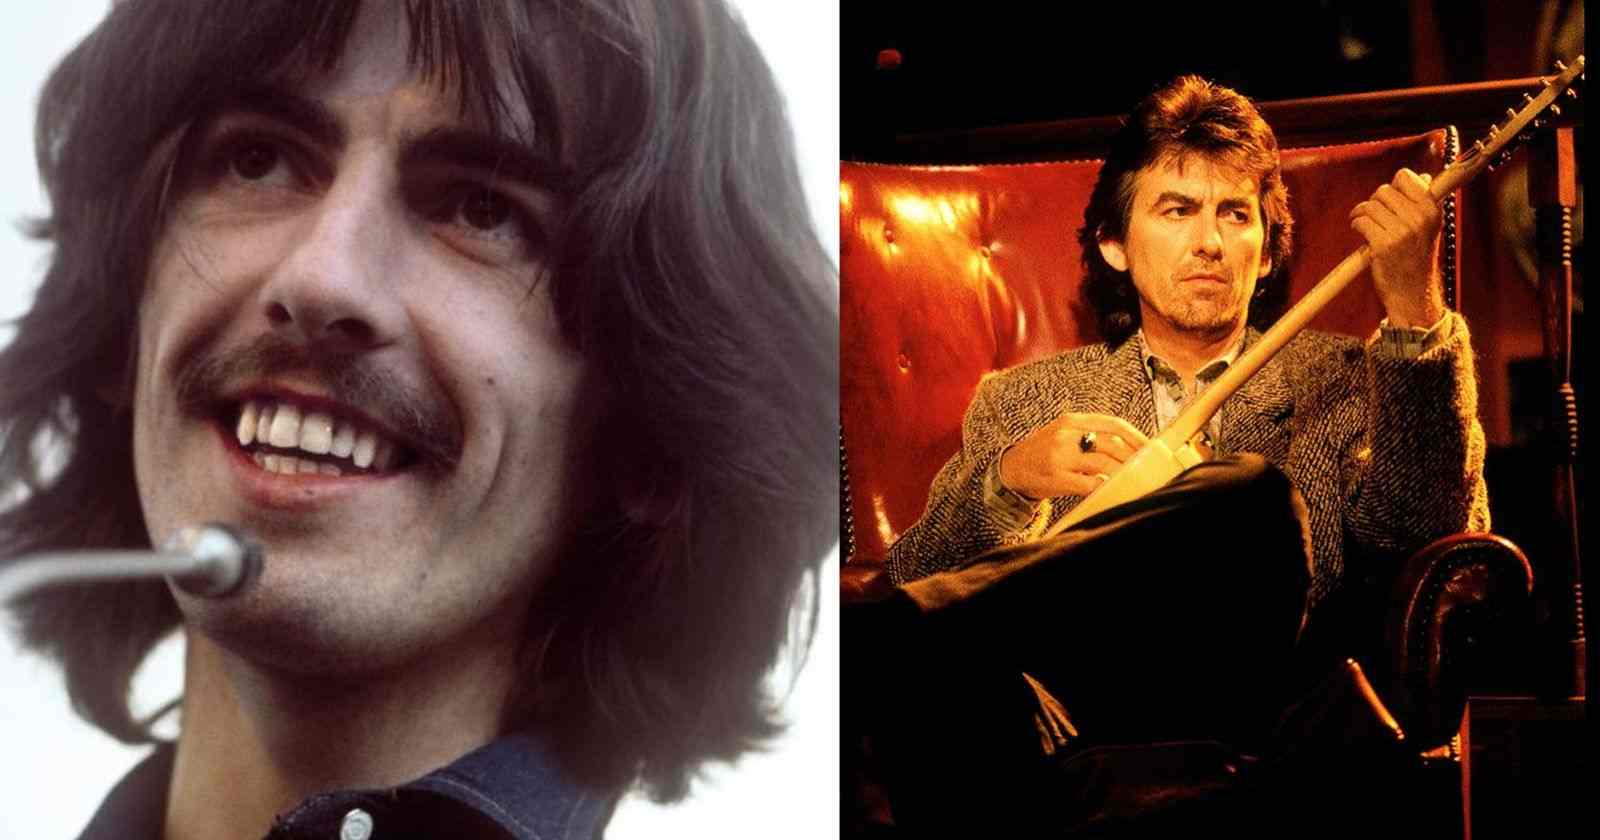 The 3 artists George Harrison said he liked to listen to in the 70s